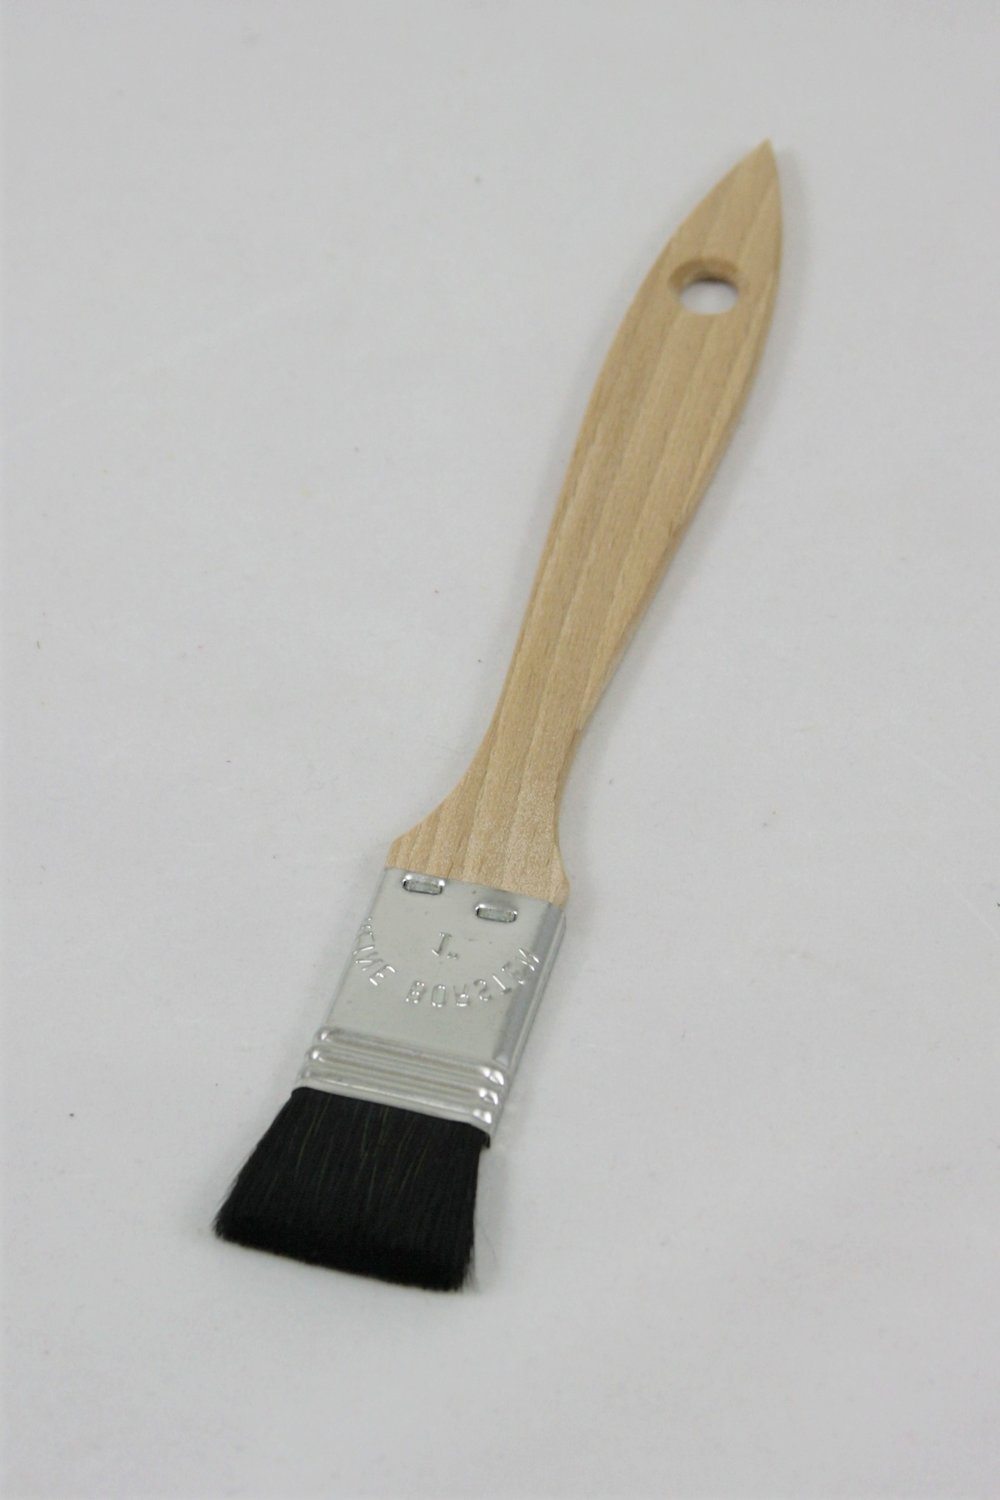 1 in. Flat Paint Brush, GOOD Quality